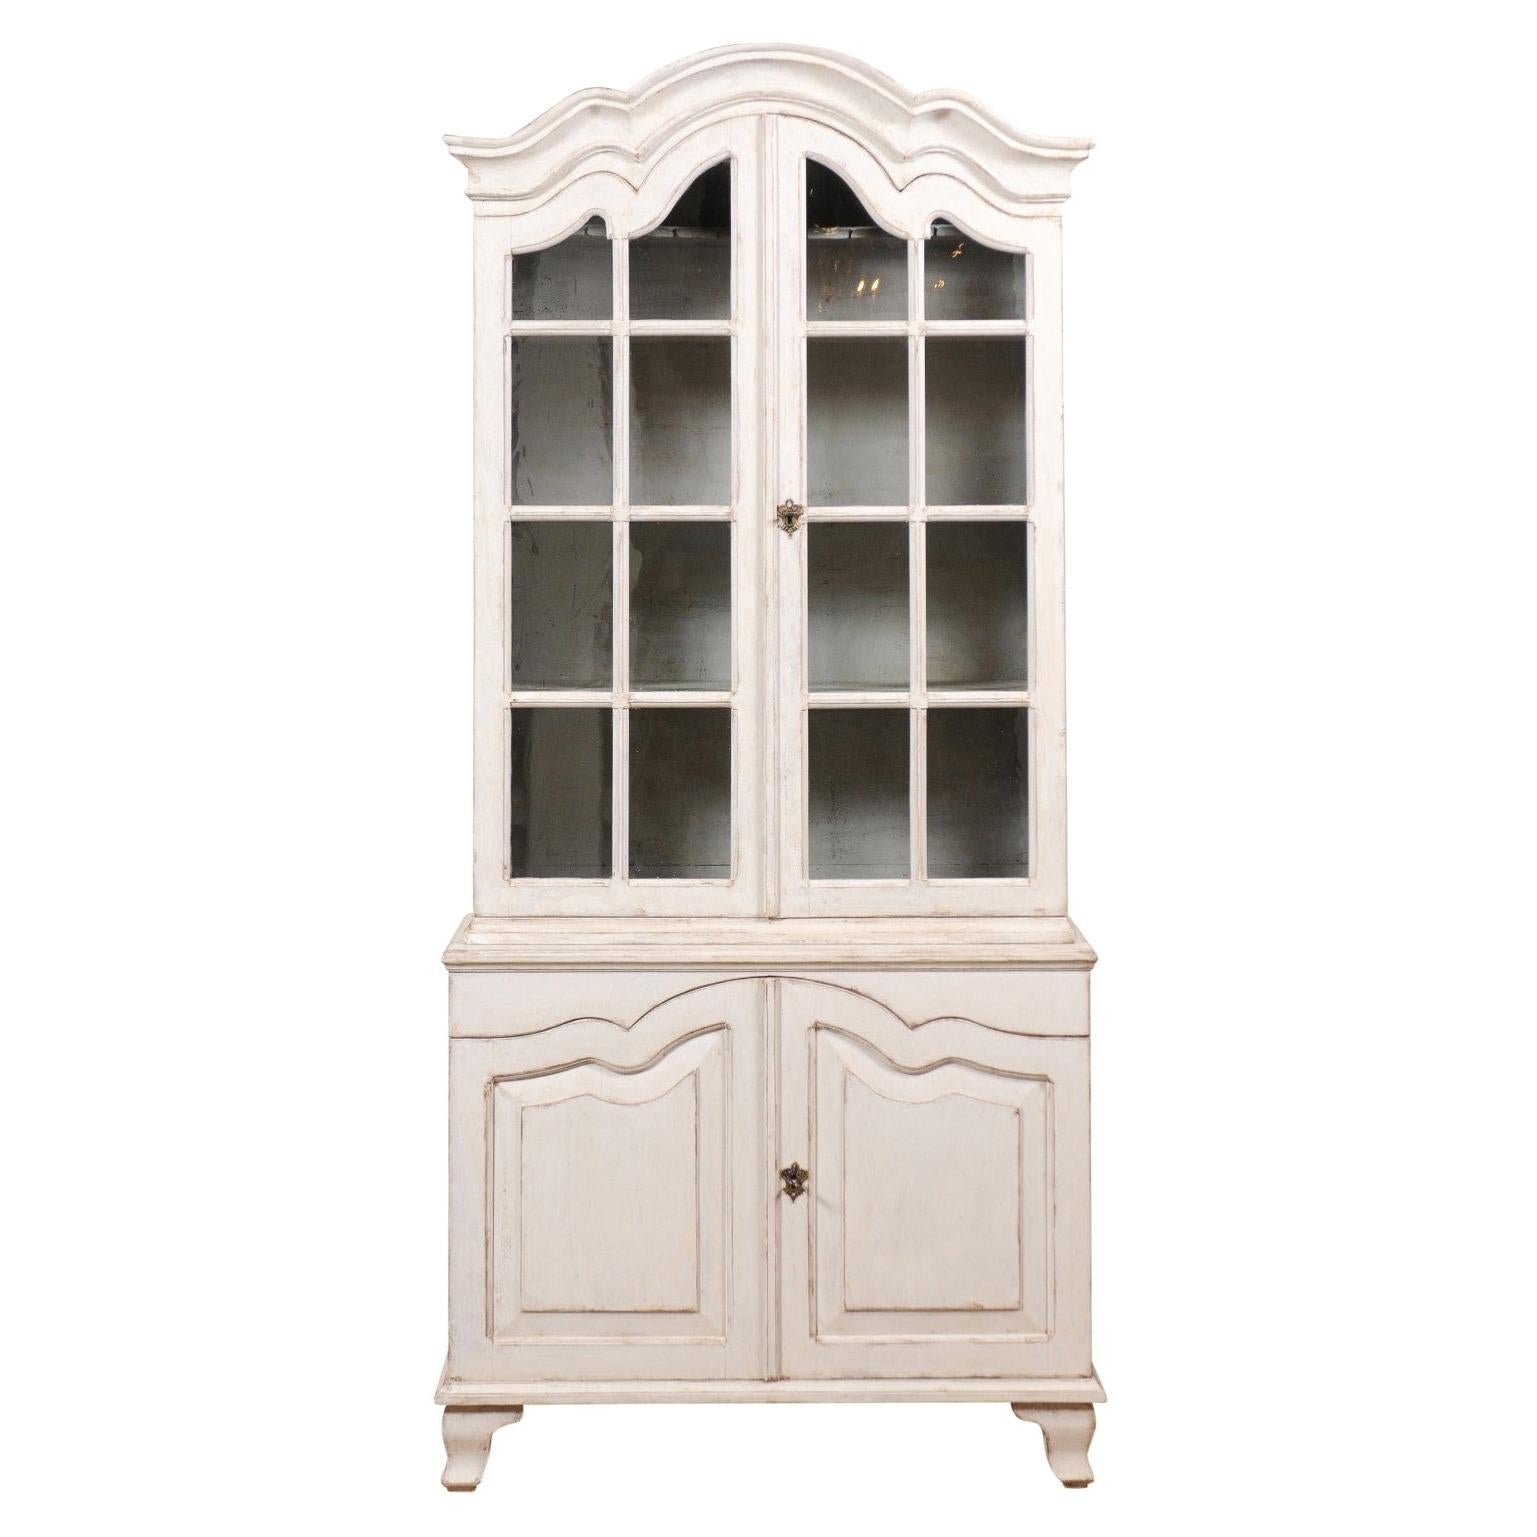 Swedish Rococo Style 19th Century Painted Wood Vitrine Cabinet with Glass Doors